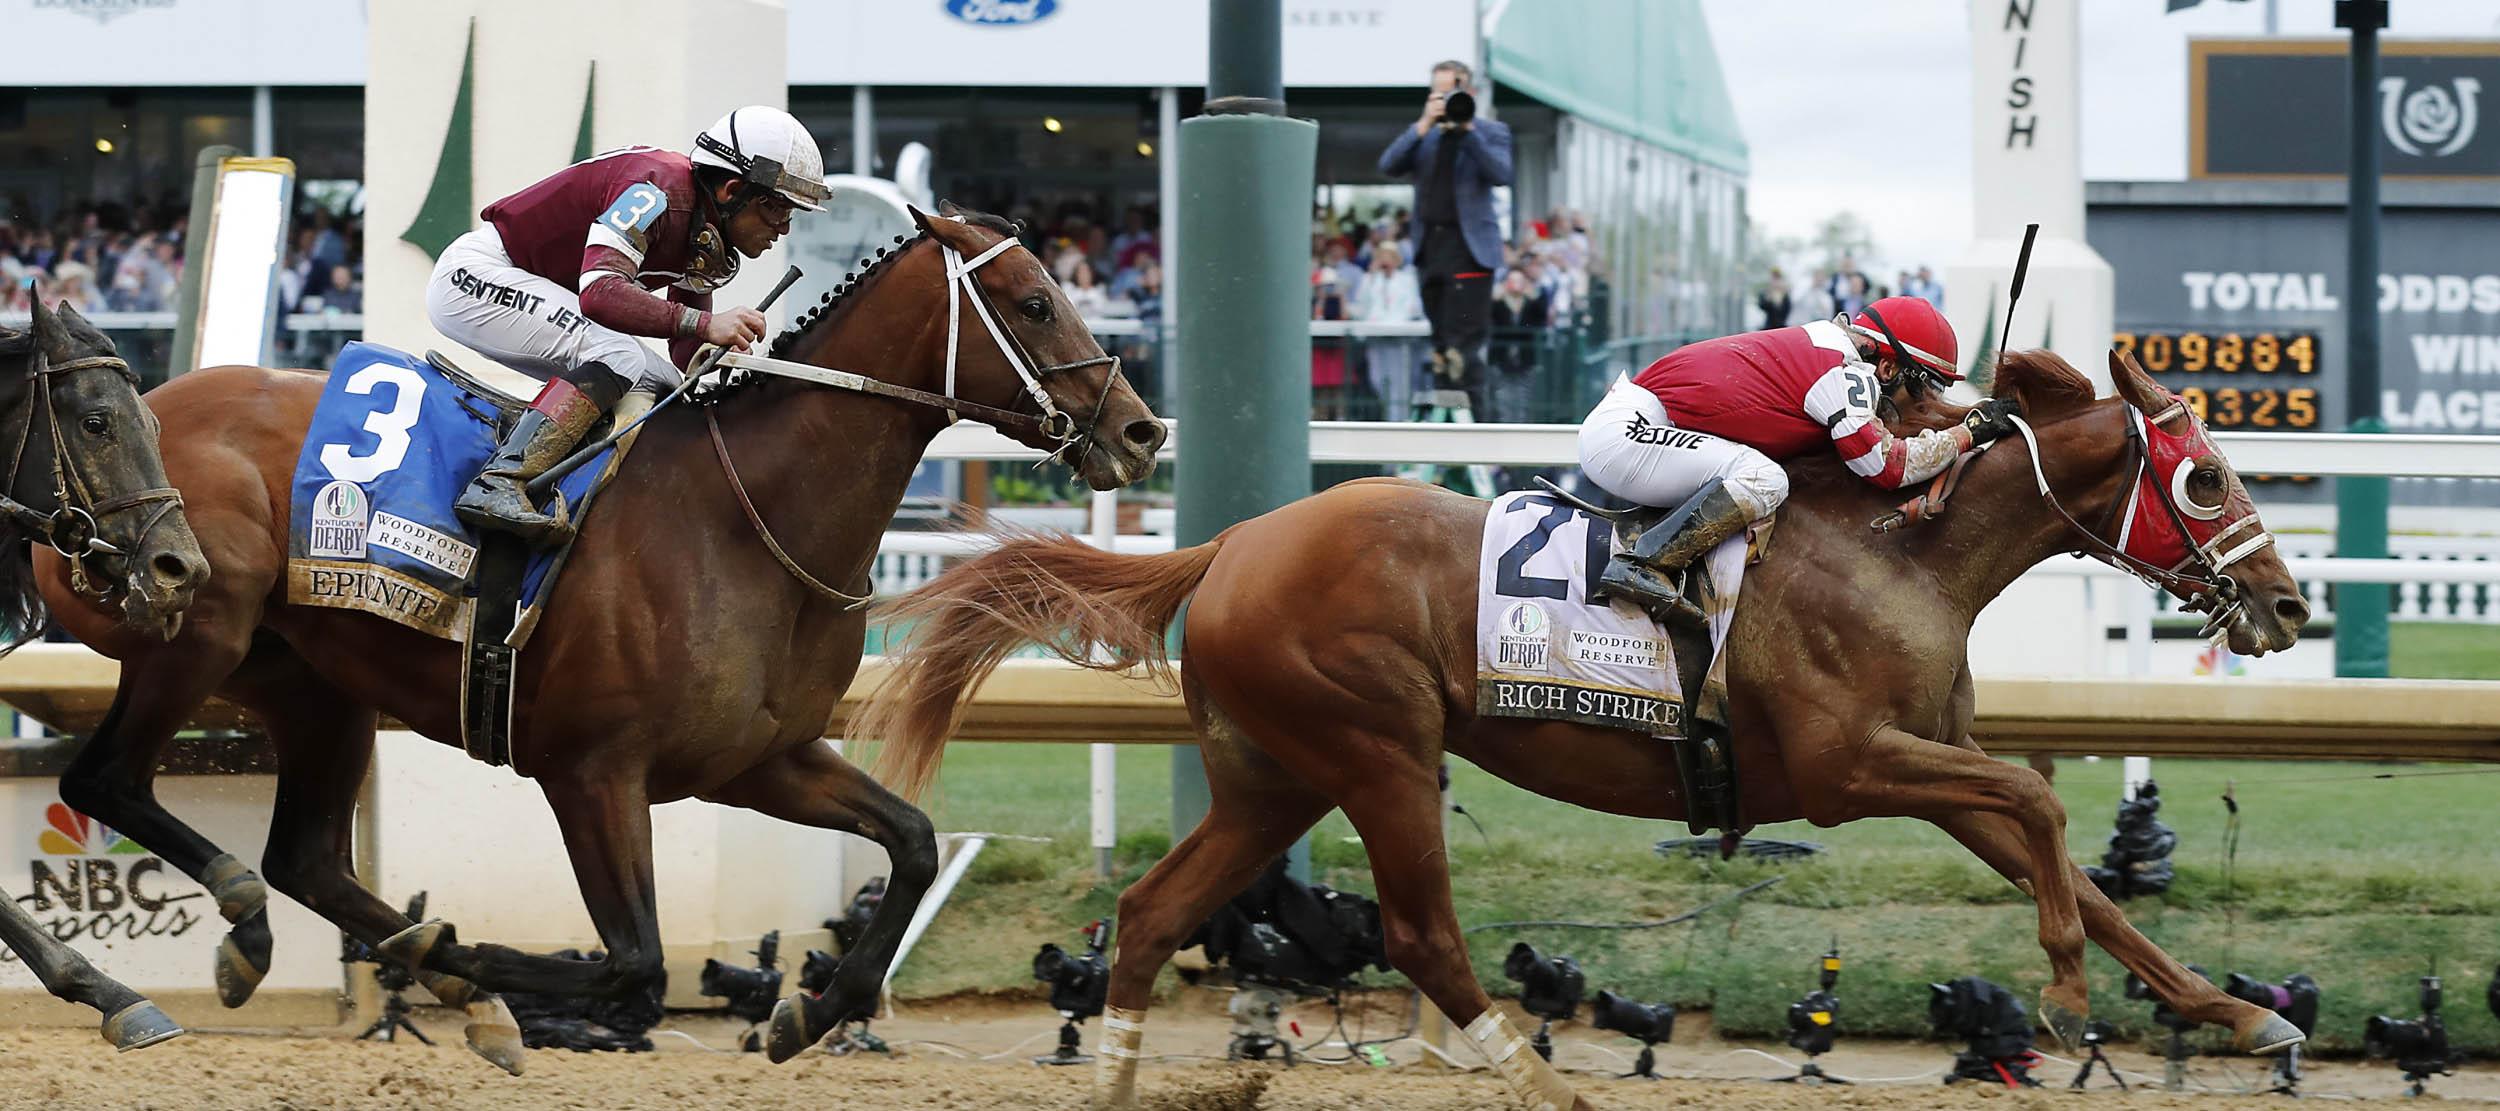 2022 Preakness Stakes Betting Predictions Can Rich Strike Win the Race